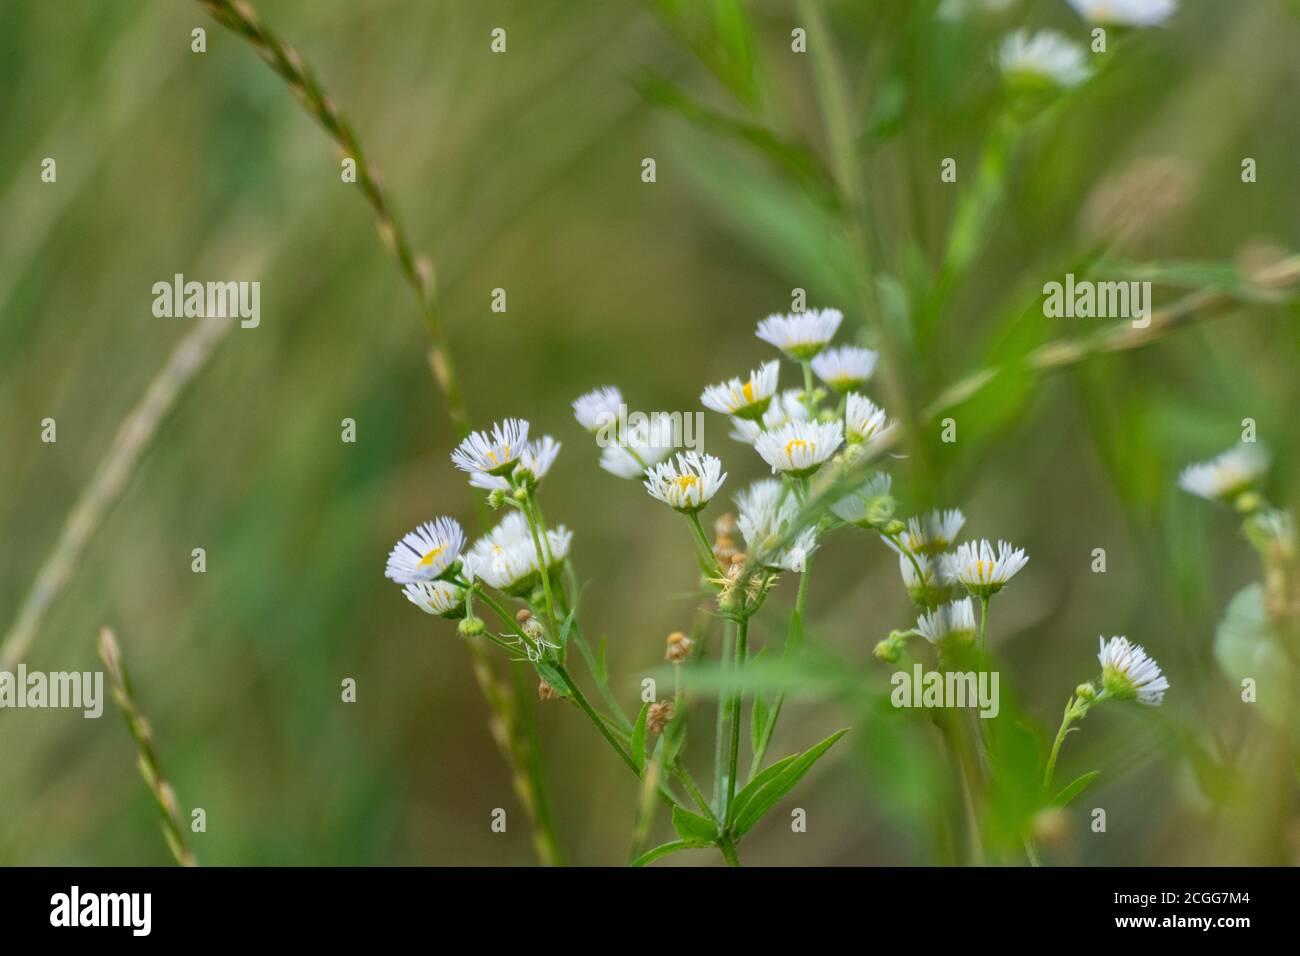 Sweet tiny white wild daisy like flowers in natural flowers field in green, yellow and purple flowers around environment. Erigeron strigosus Stock Photo